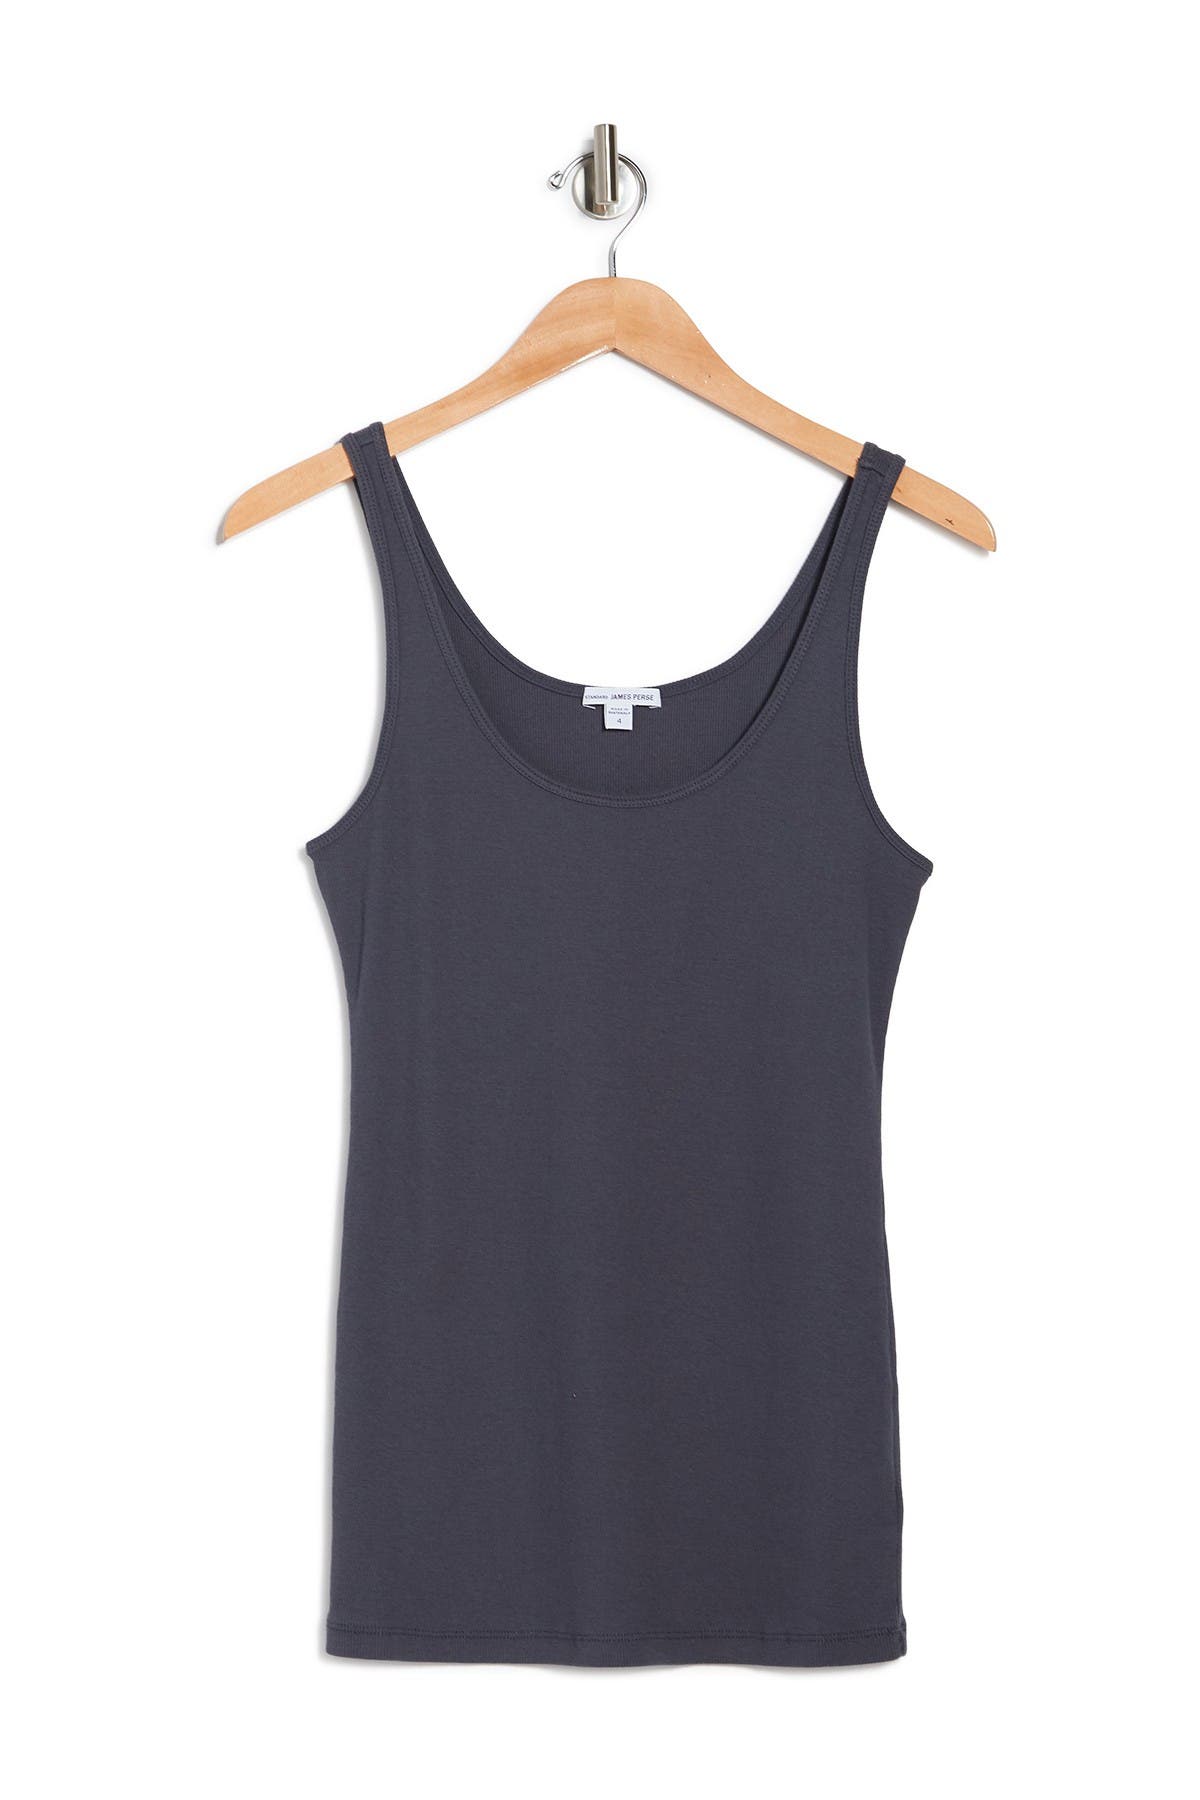 James Perse Ribbed Knit Tank In Sloe